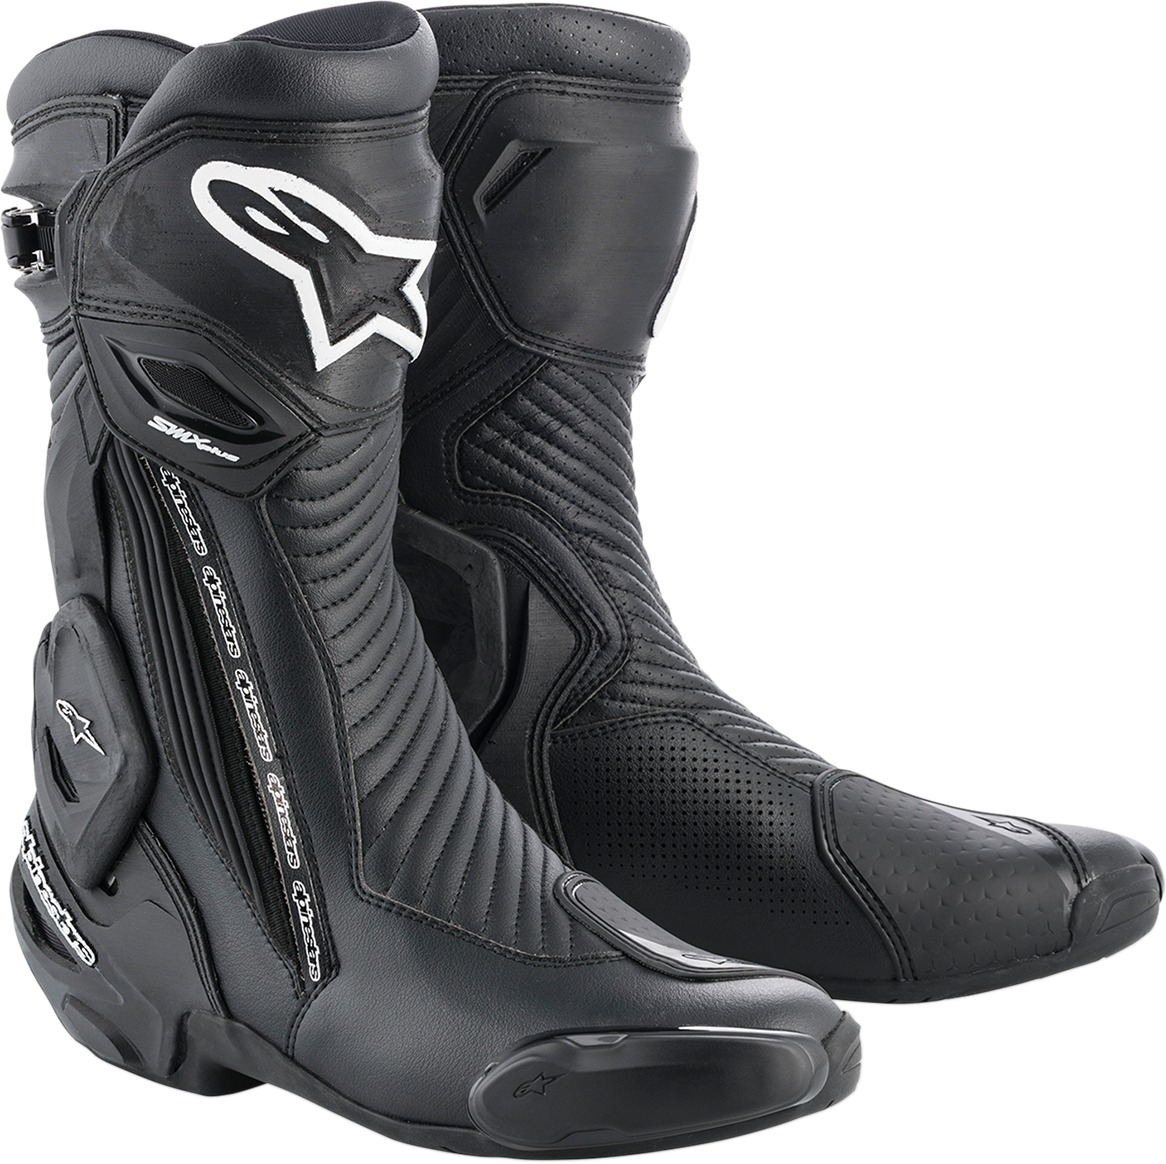 SMX Plus Street Riding Boots Black US 4 - Click Image to Close